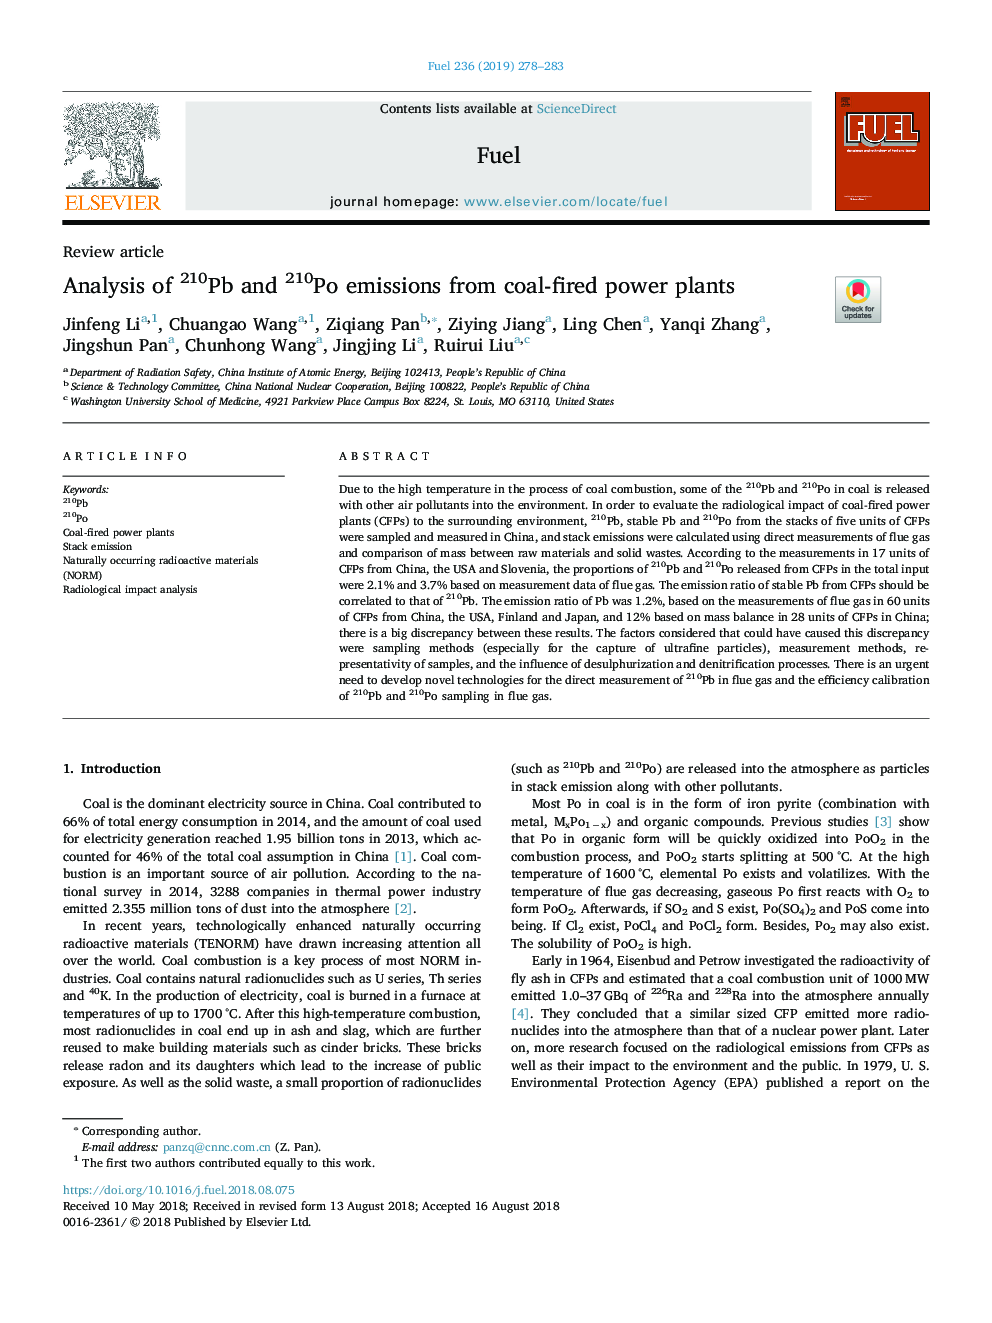 Analysis of 210Pb and 210Po emissions from coal-fired power plants